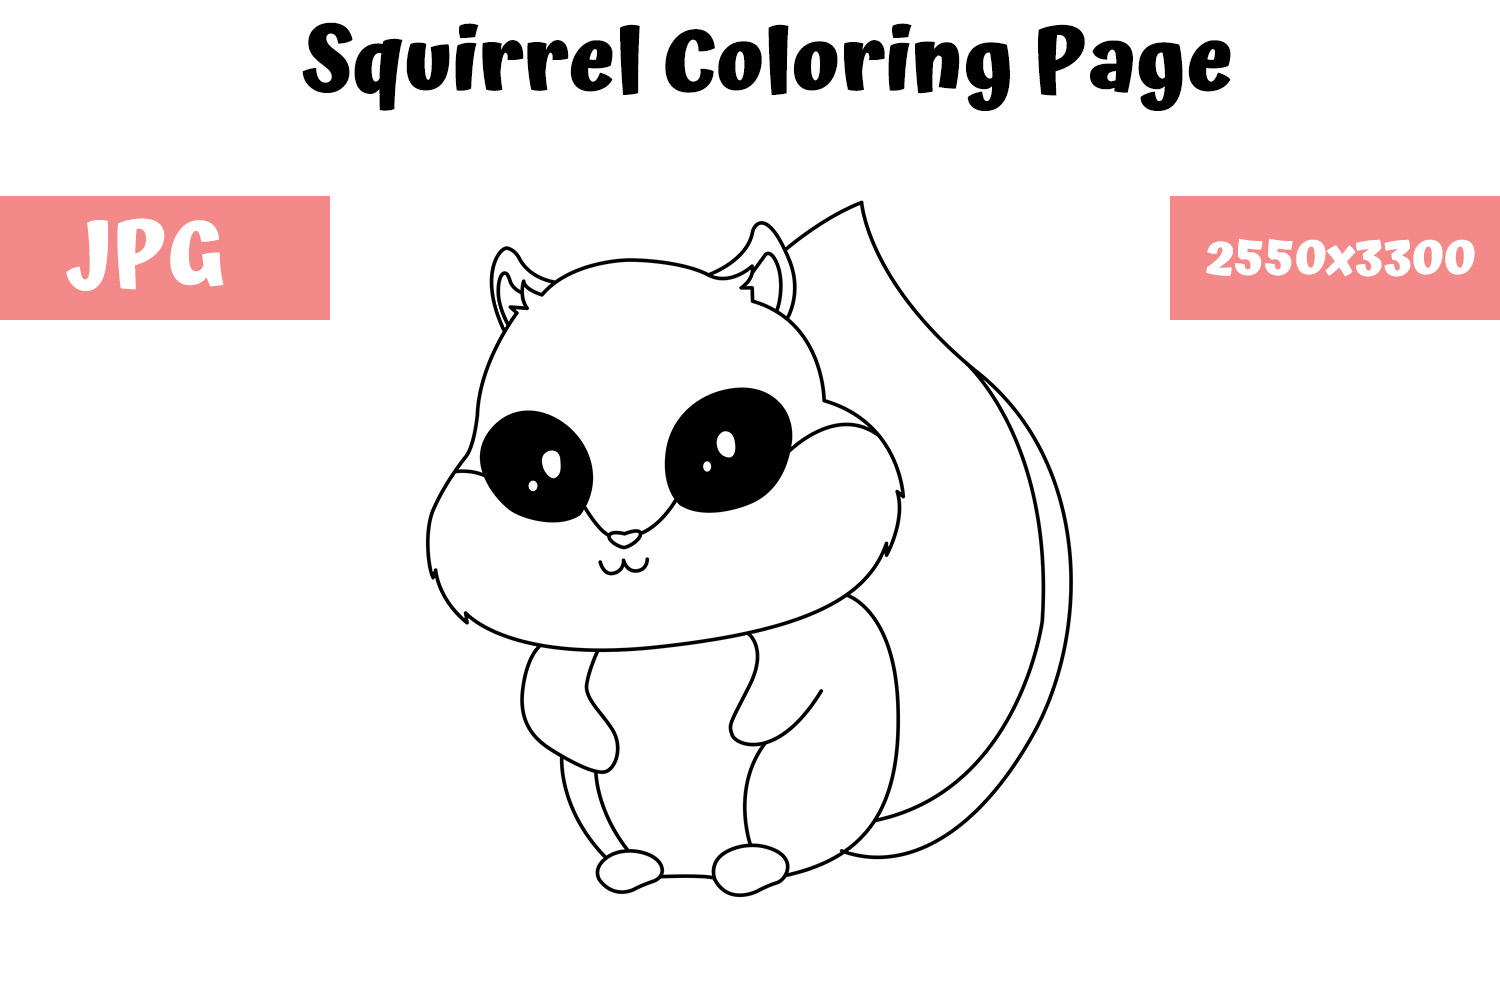 Download Squirrel Coloring Book Page For Kids Graphic By Mybeautifulfiles Creative Fabrica